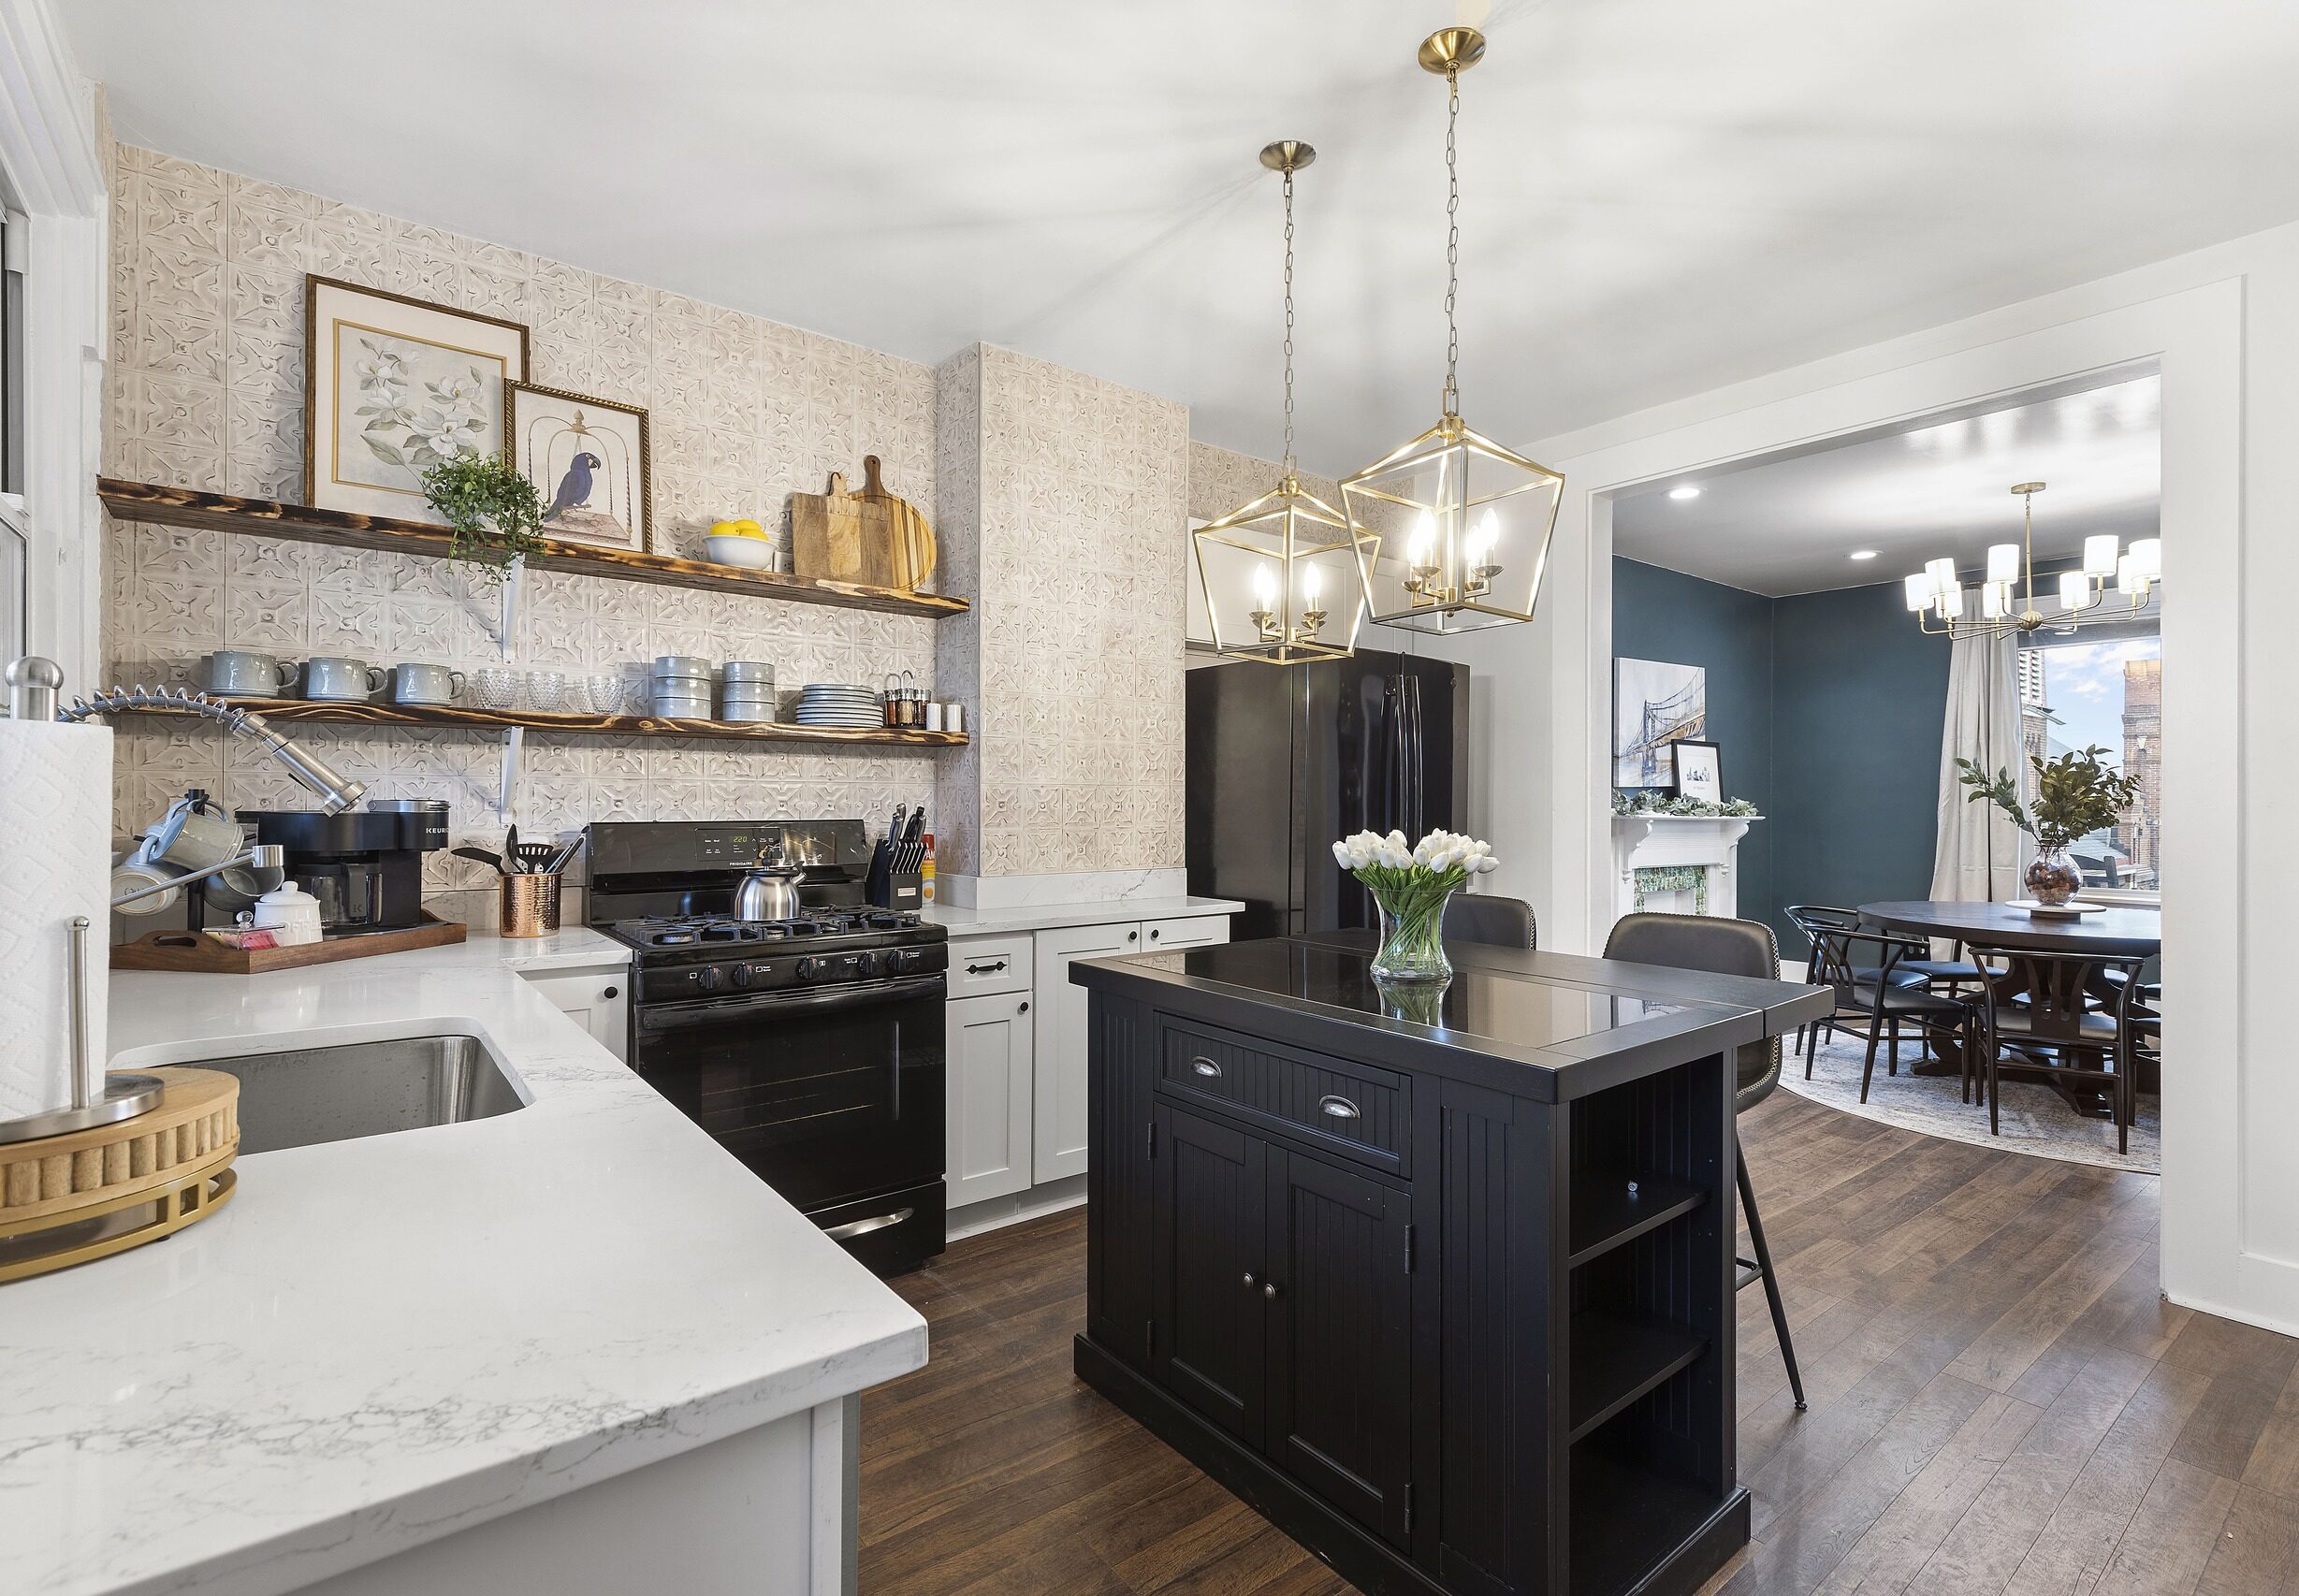 Modern, renovated kitchen in a vacation rental, featuring white countertops, black appliances, and elegant pendant lighting.